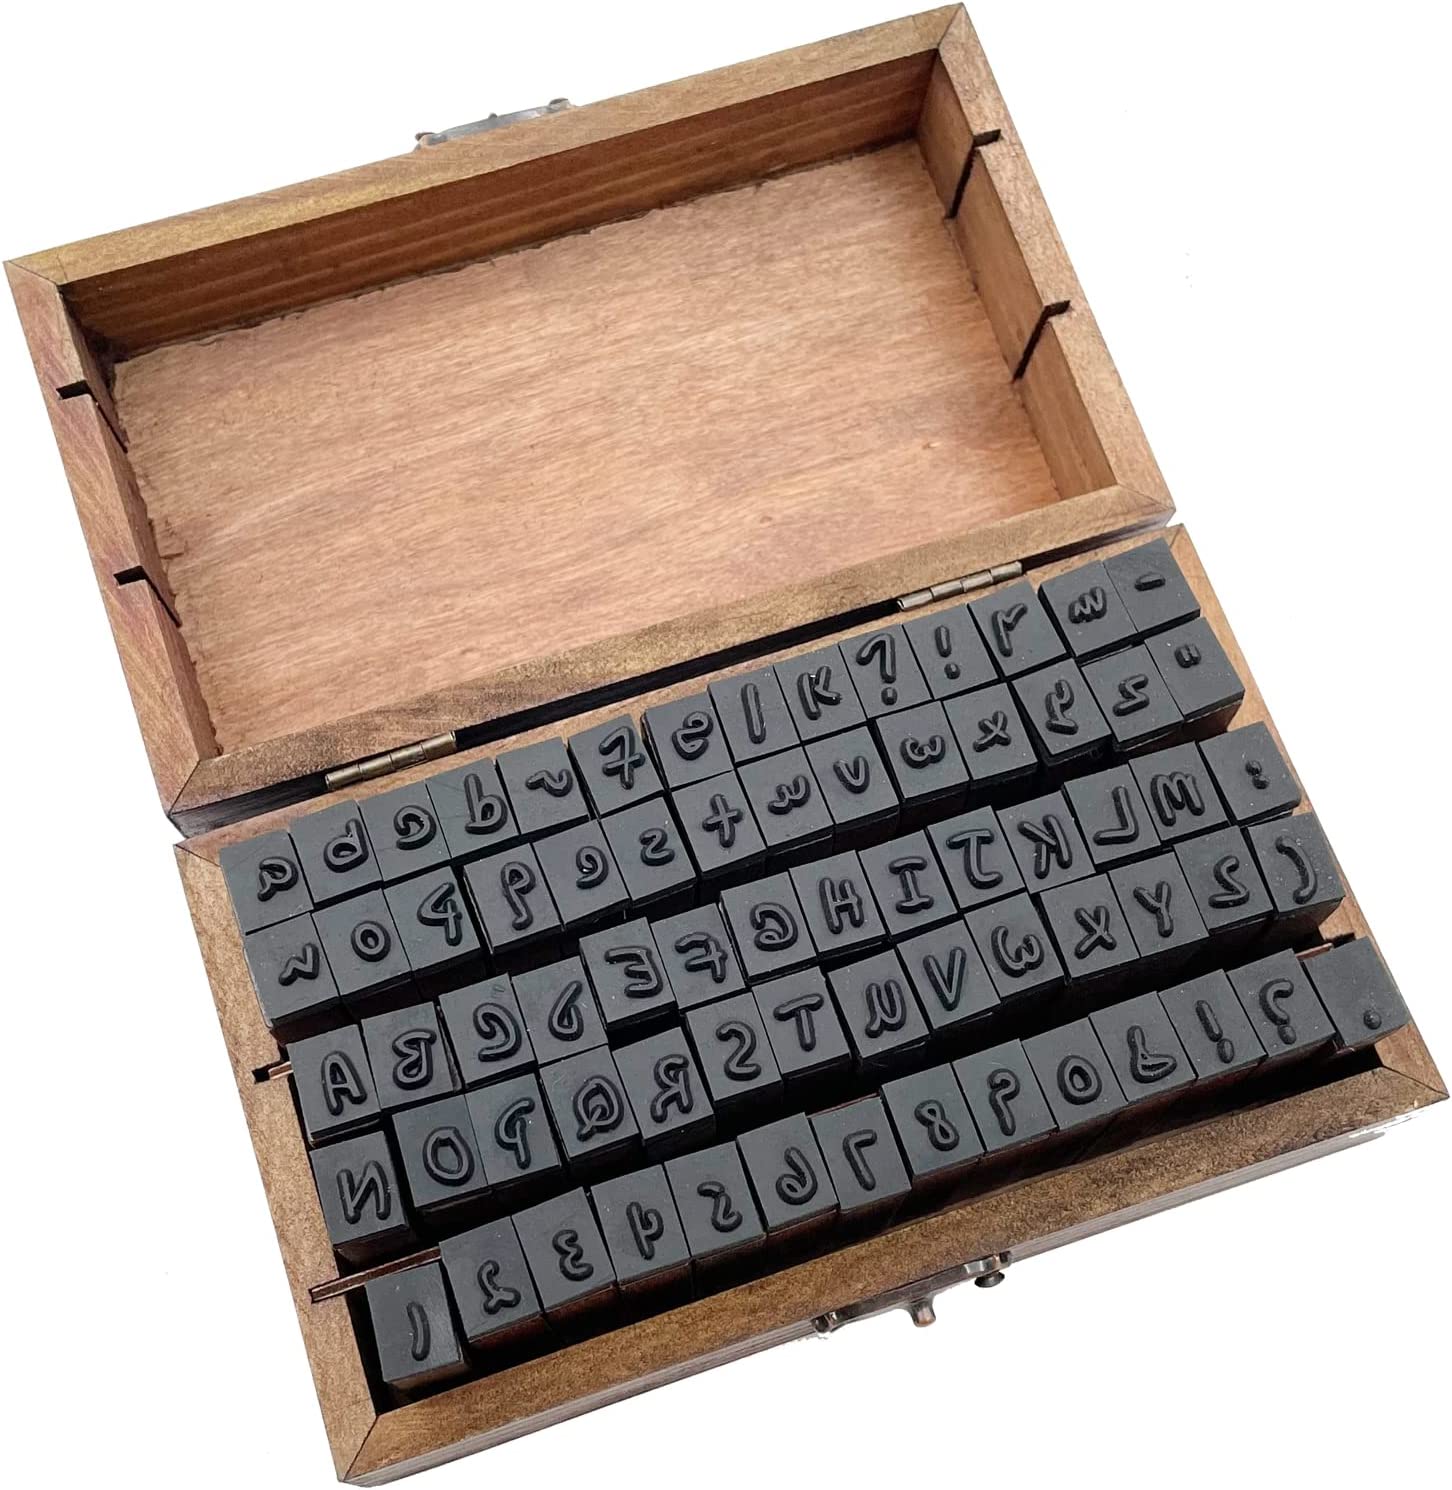 Alphabet Stamps 70 PCS Vintage Wooden Rubber Letter Number Alphabet  Combination Letter Stamp Diary Ablum Wedding Letter Wood Rubber Stamp Set  with Vintage Wooden Box Gift (Cursive Writing) 